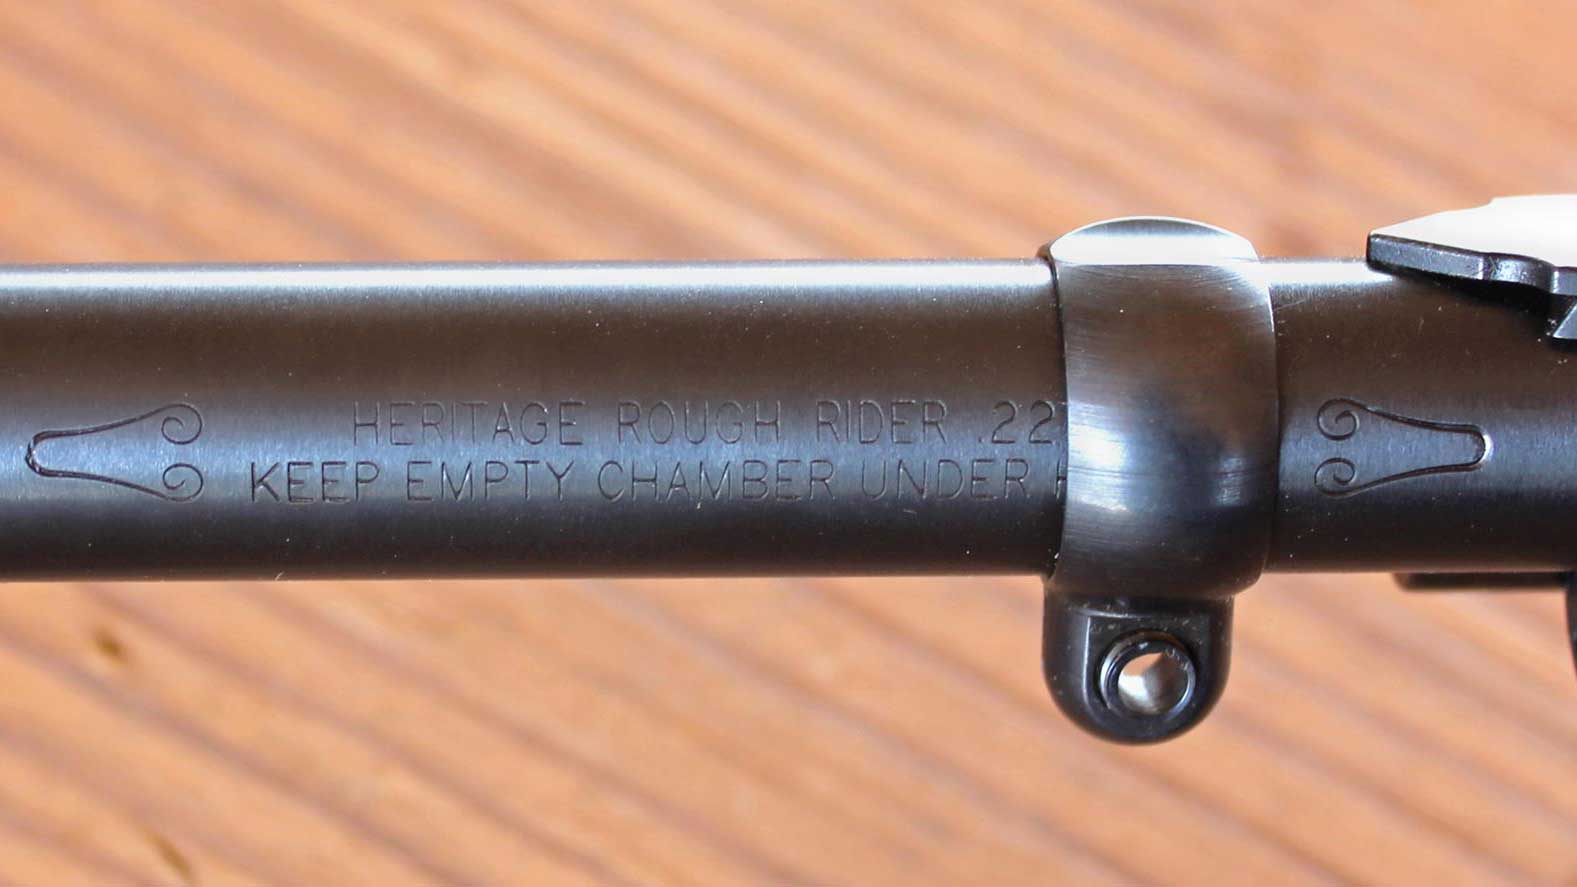 The front swivel band connected to the barrel.